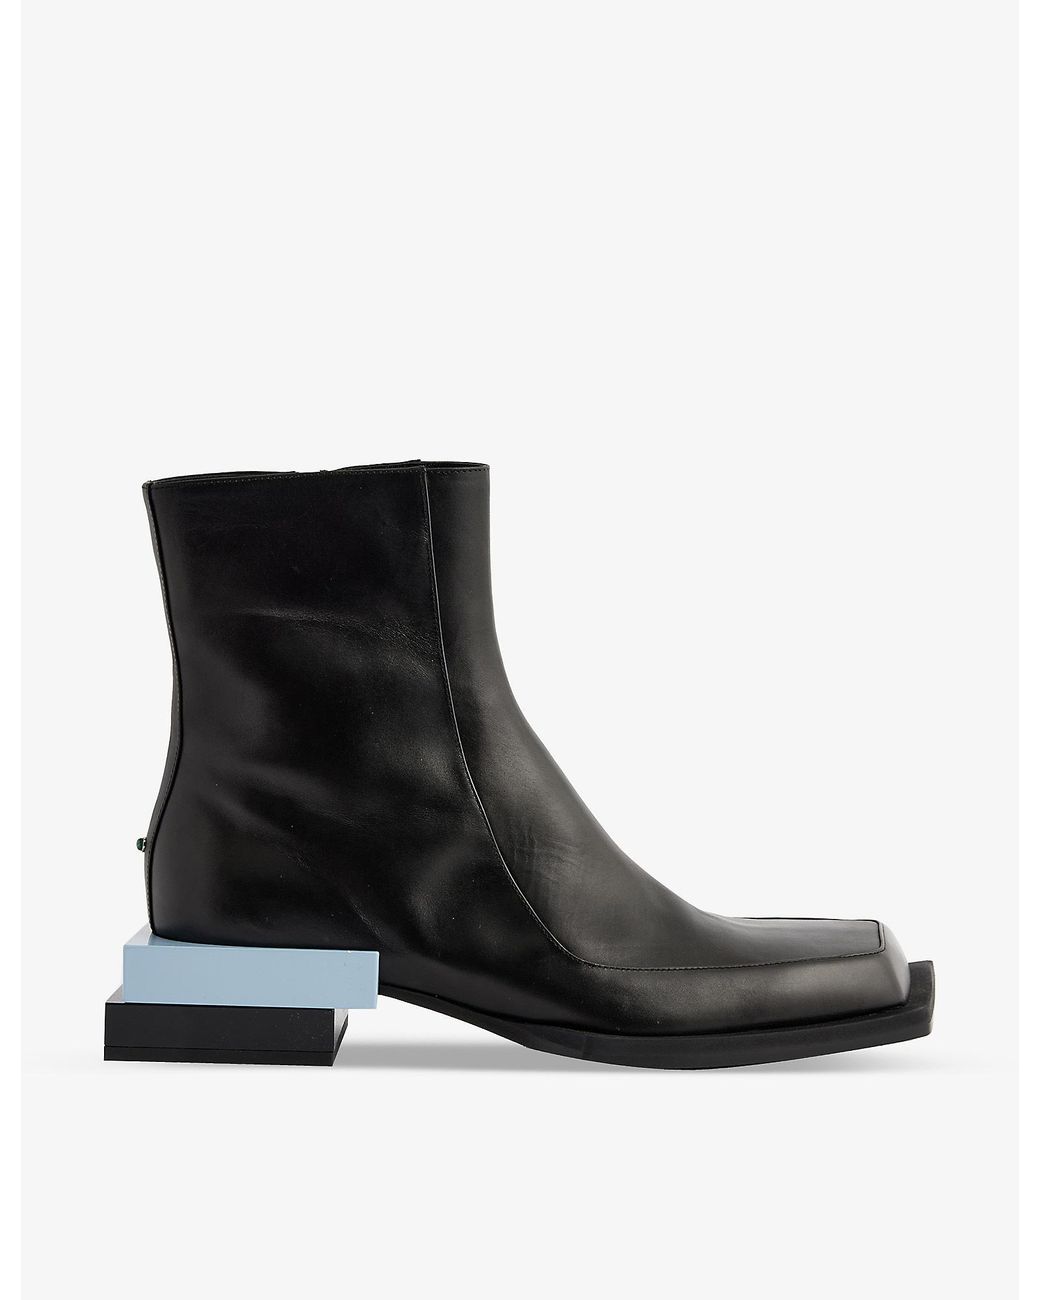 MACHINE-A Steven Ma Contrast Stacked-heel Leather Boots in Black | Lyst